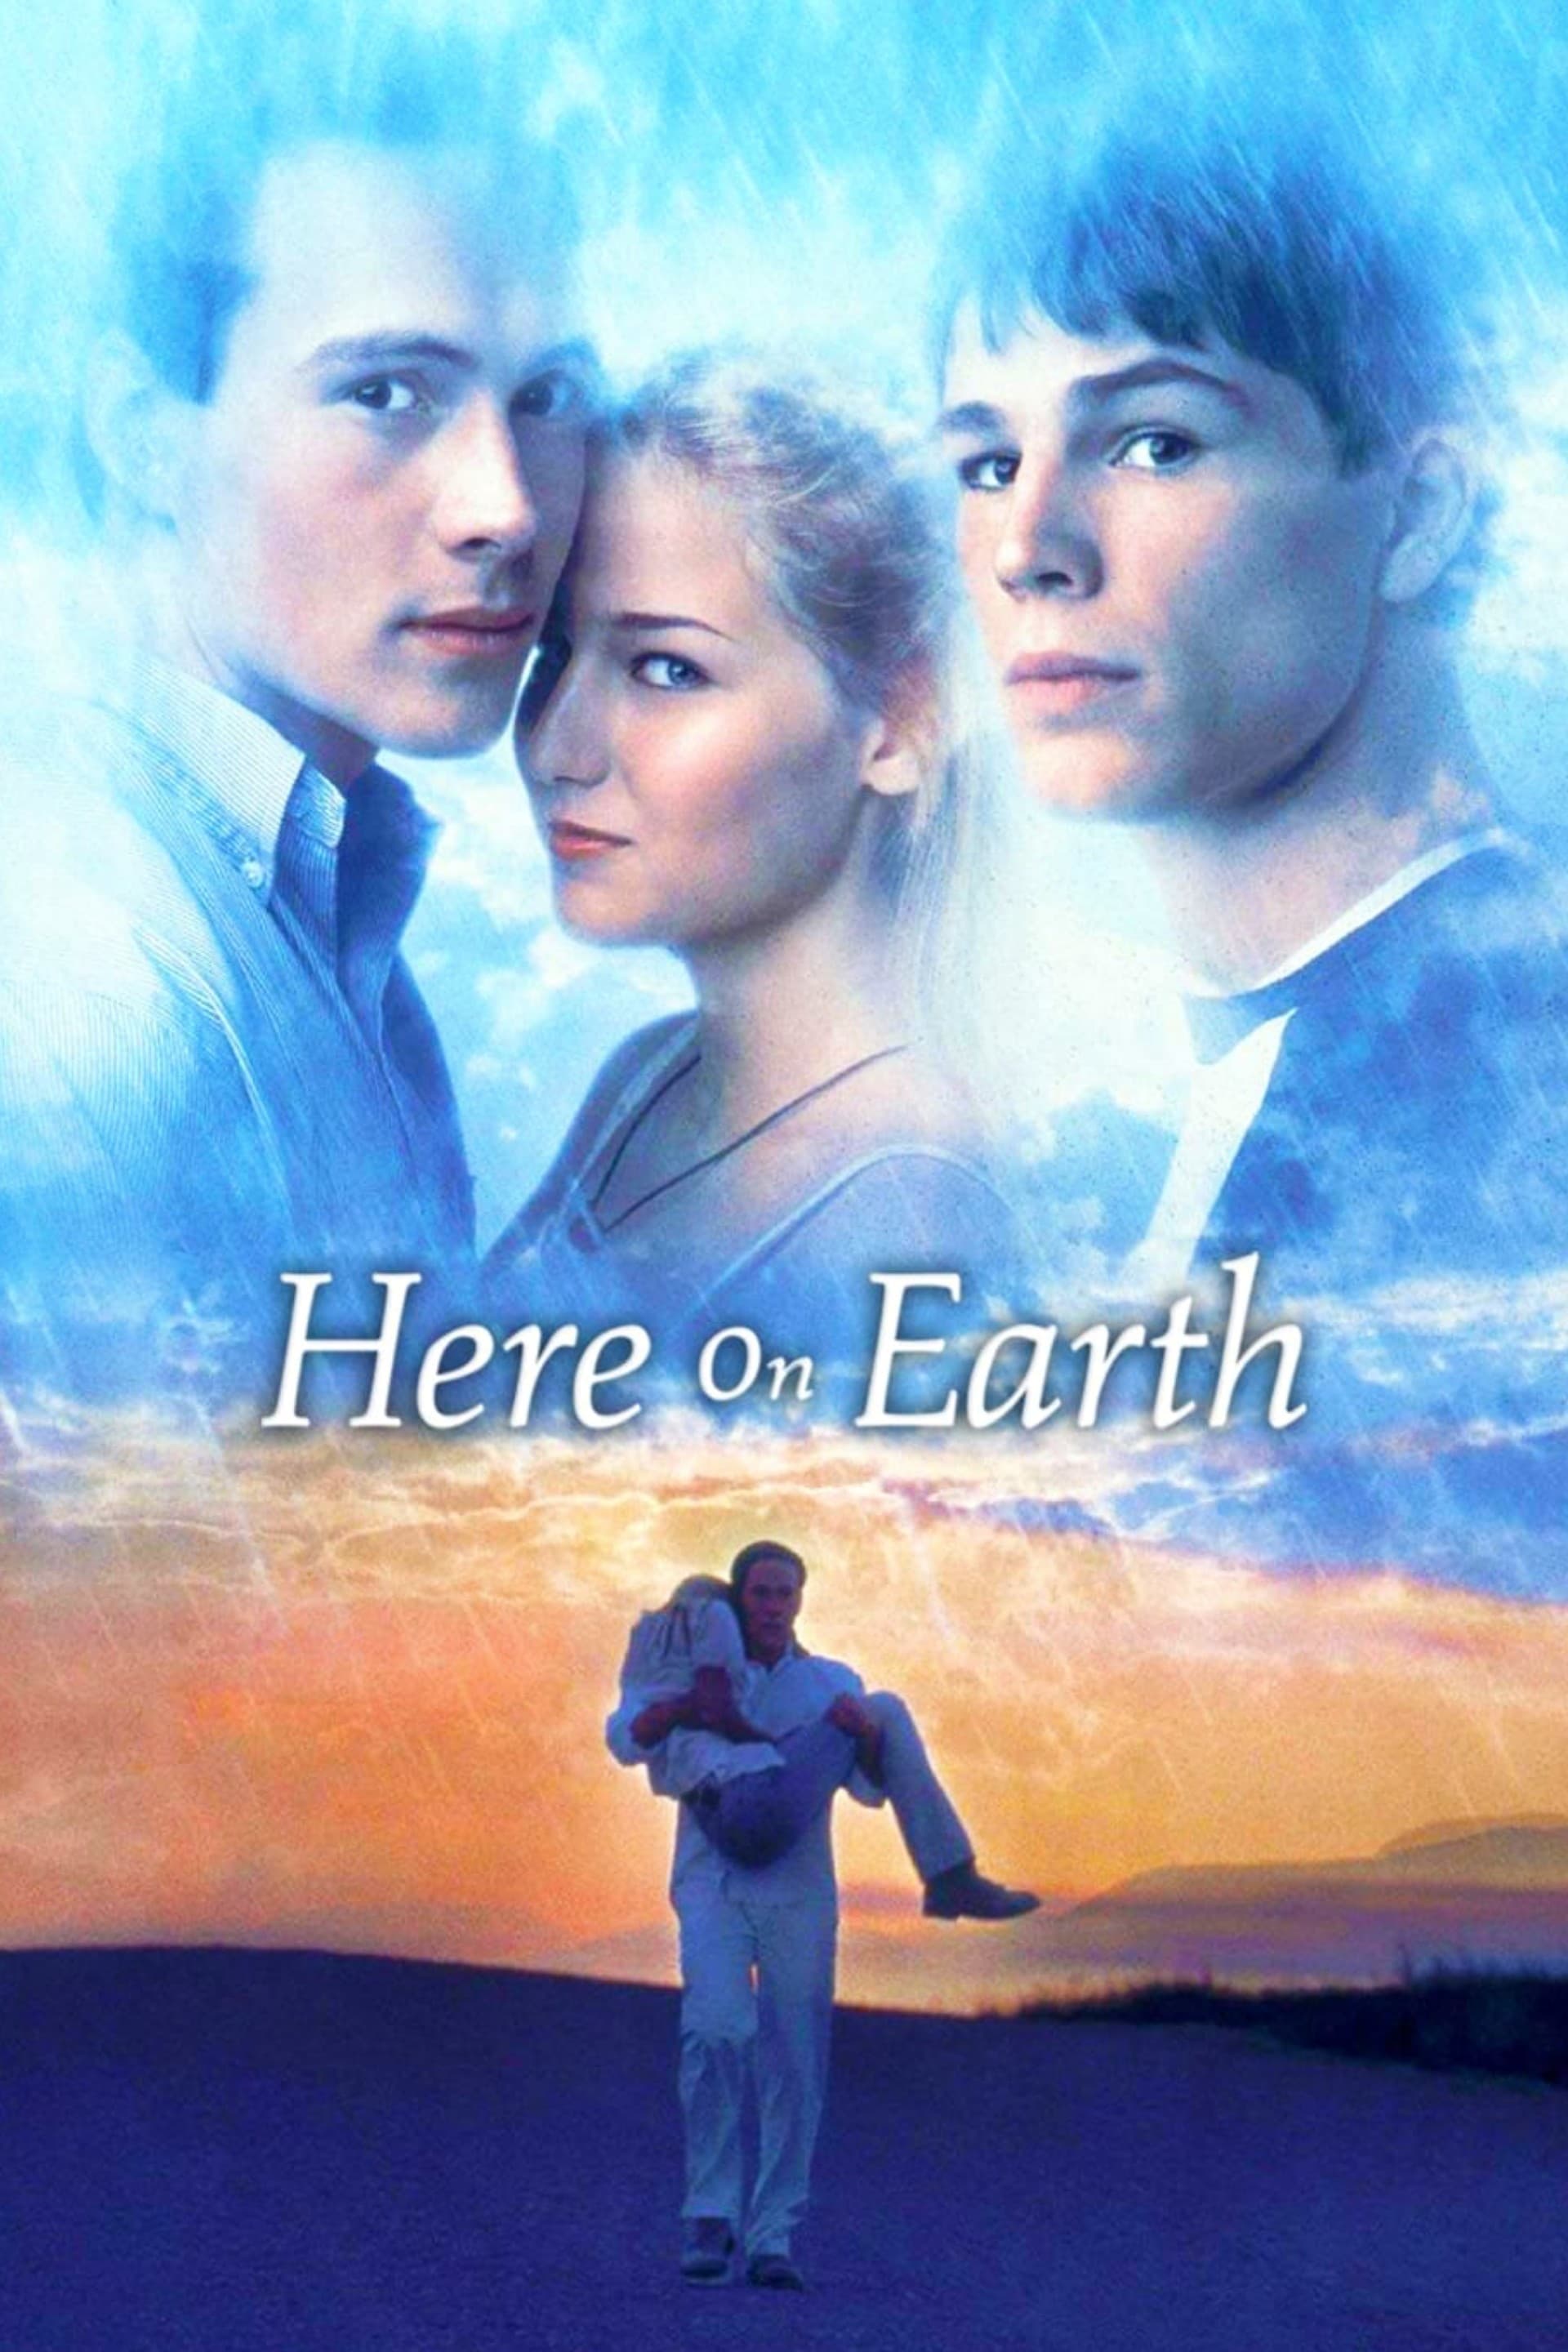 Here on Earth